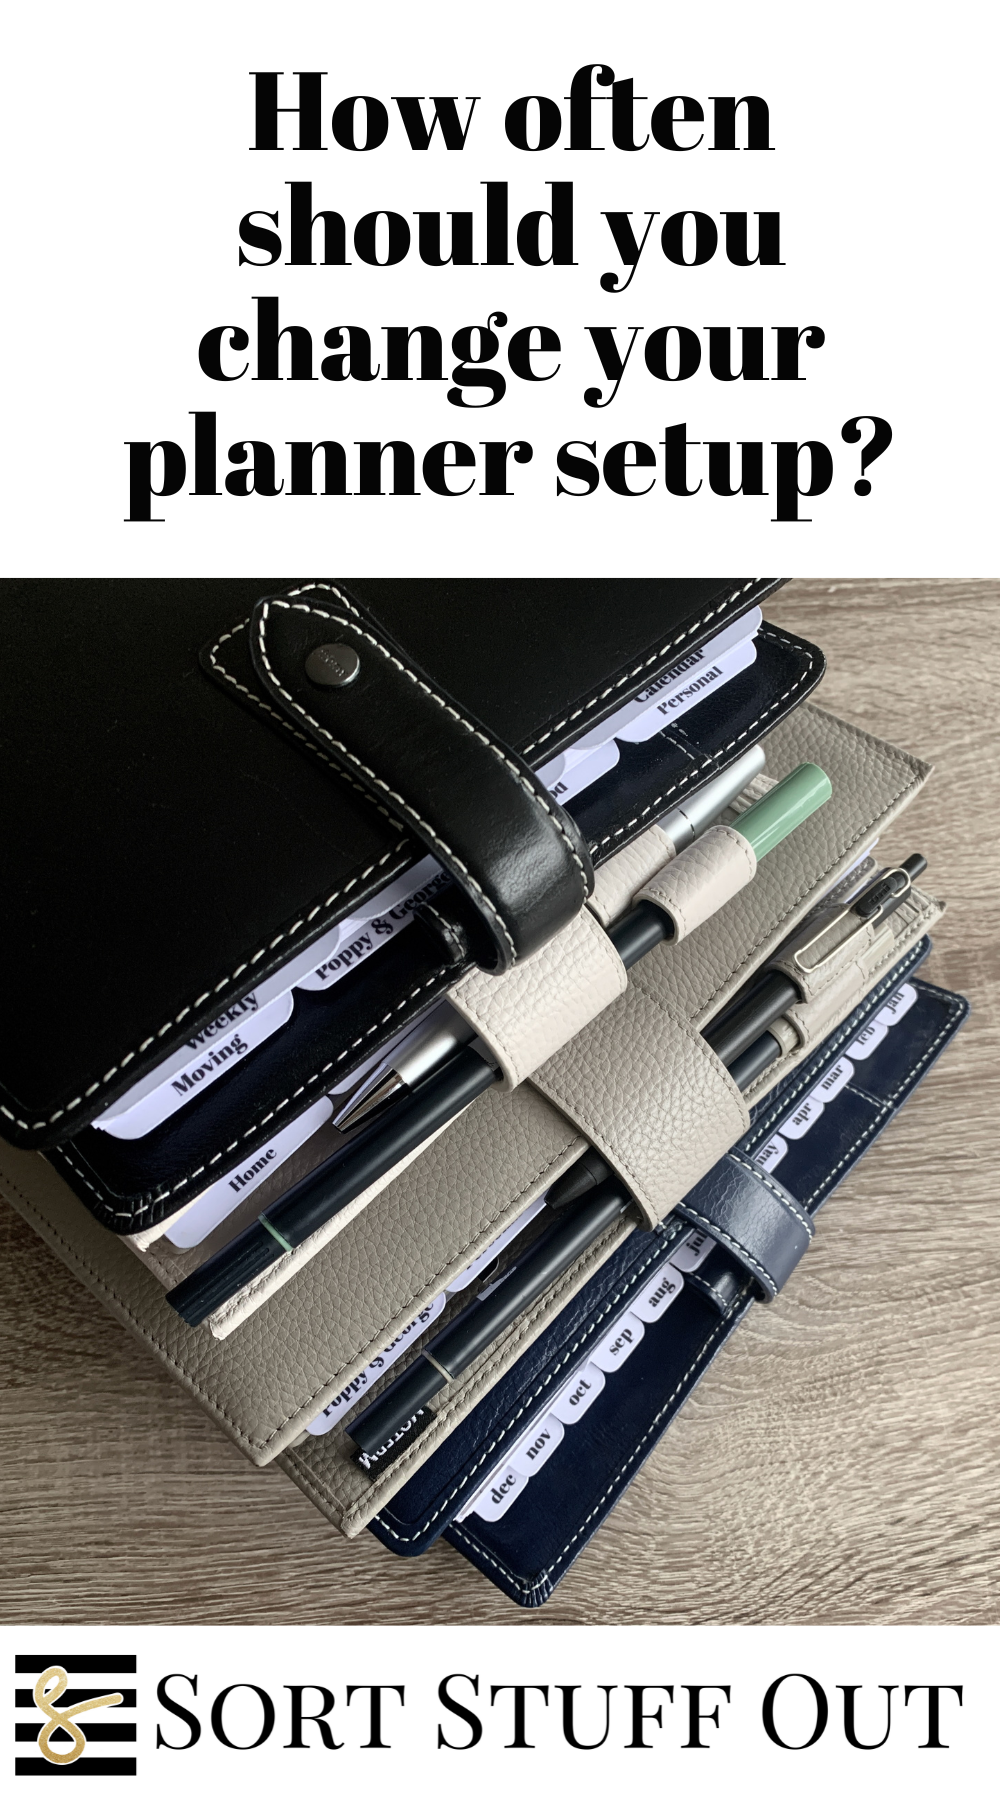 How often should you change your planner?